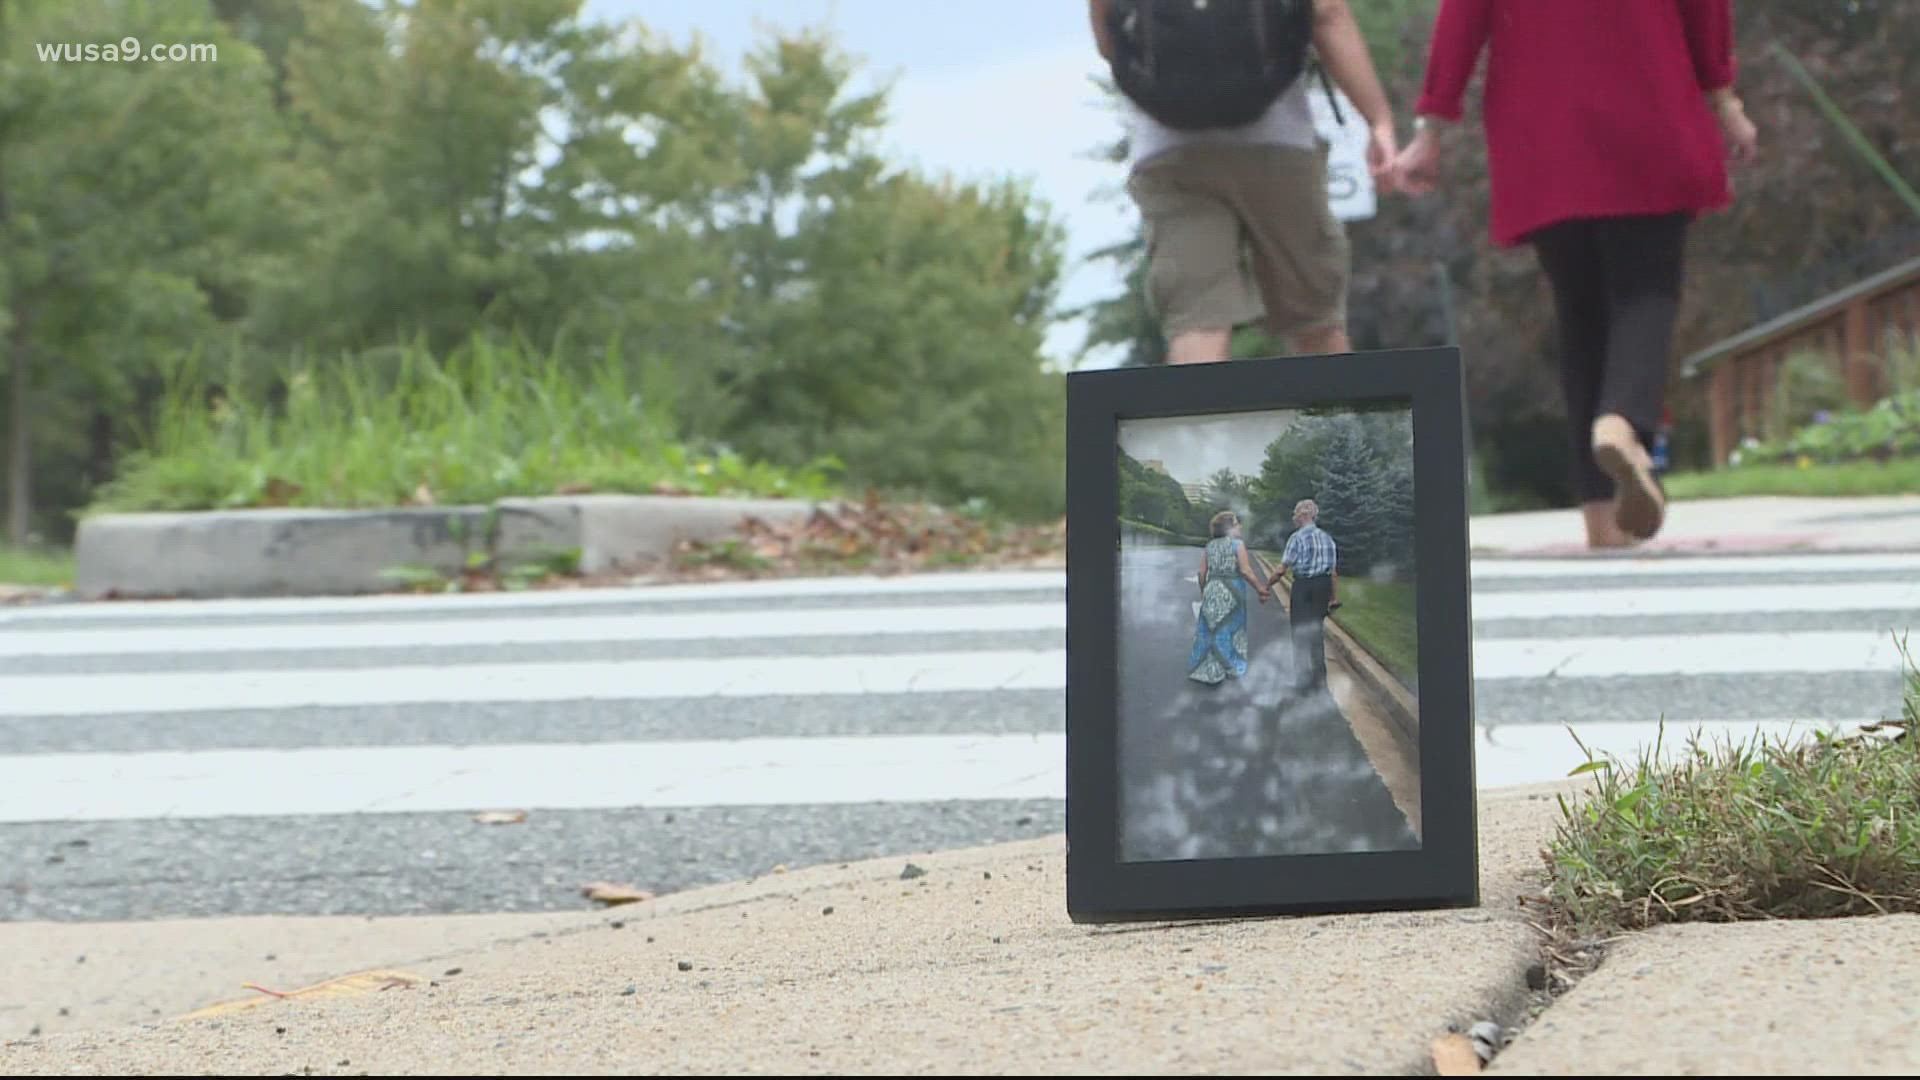 Advocates are pushing for more to be done to prioritize pedestrian safety.